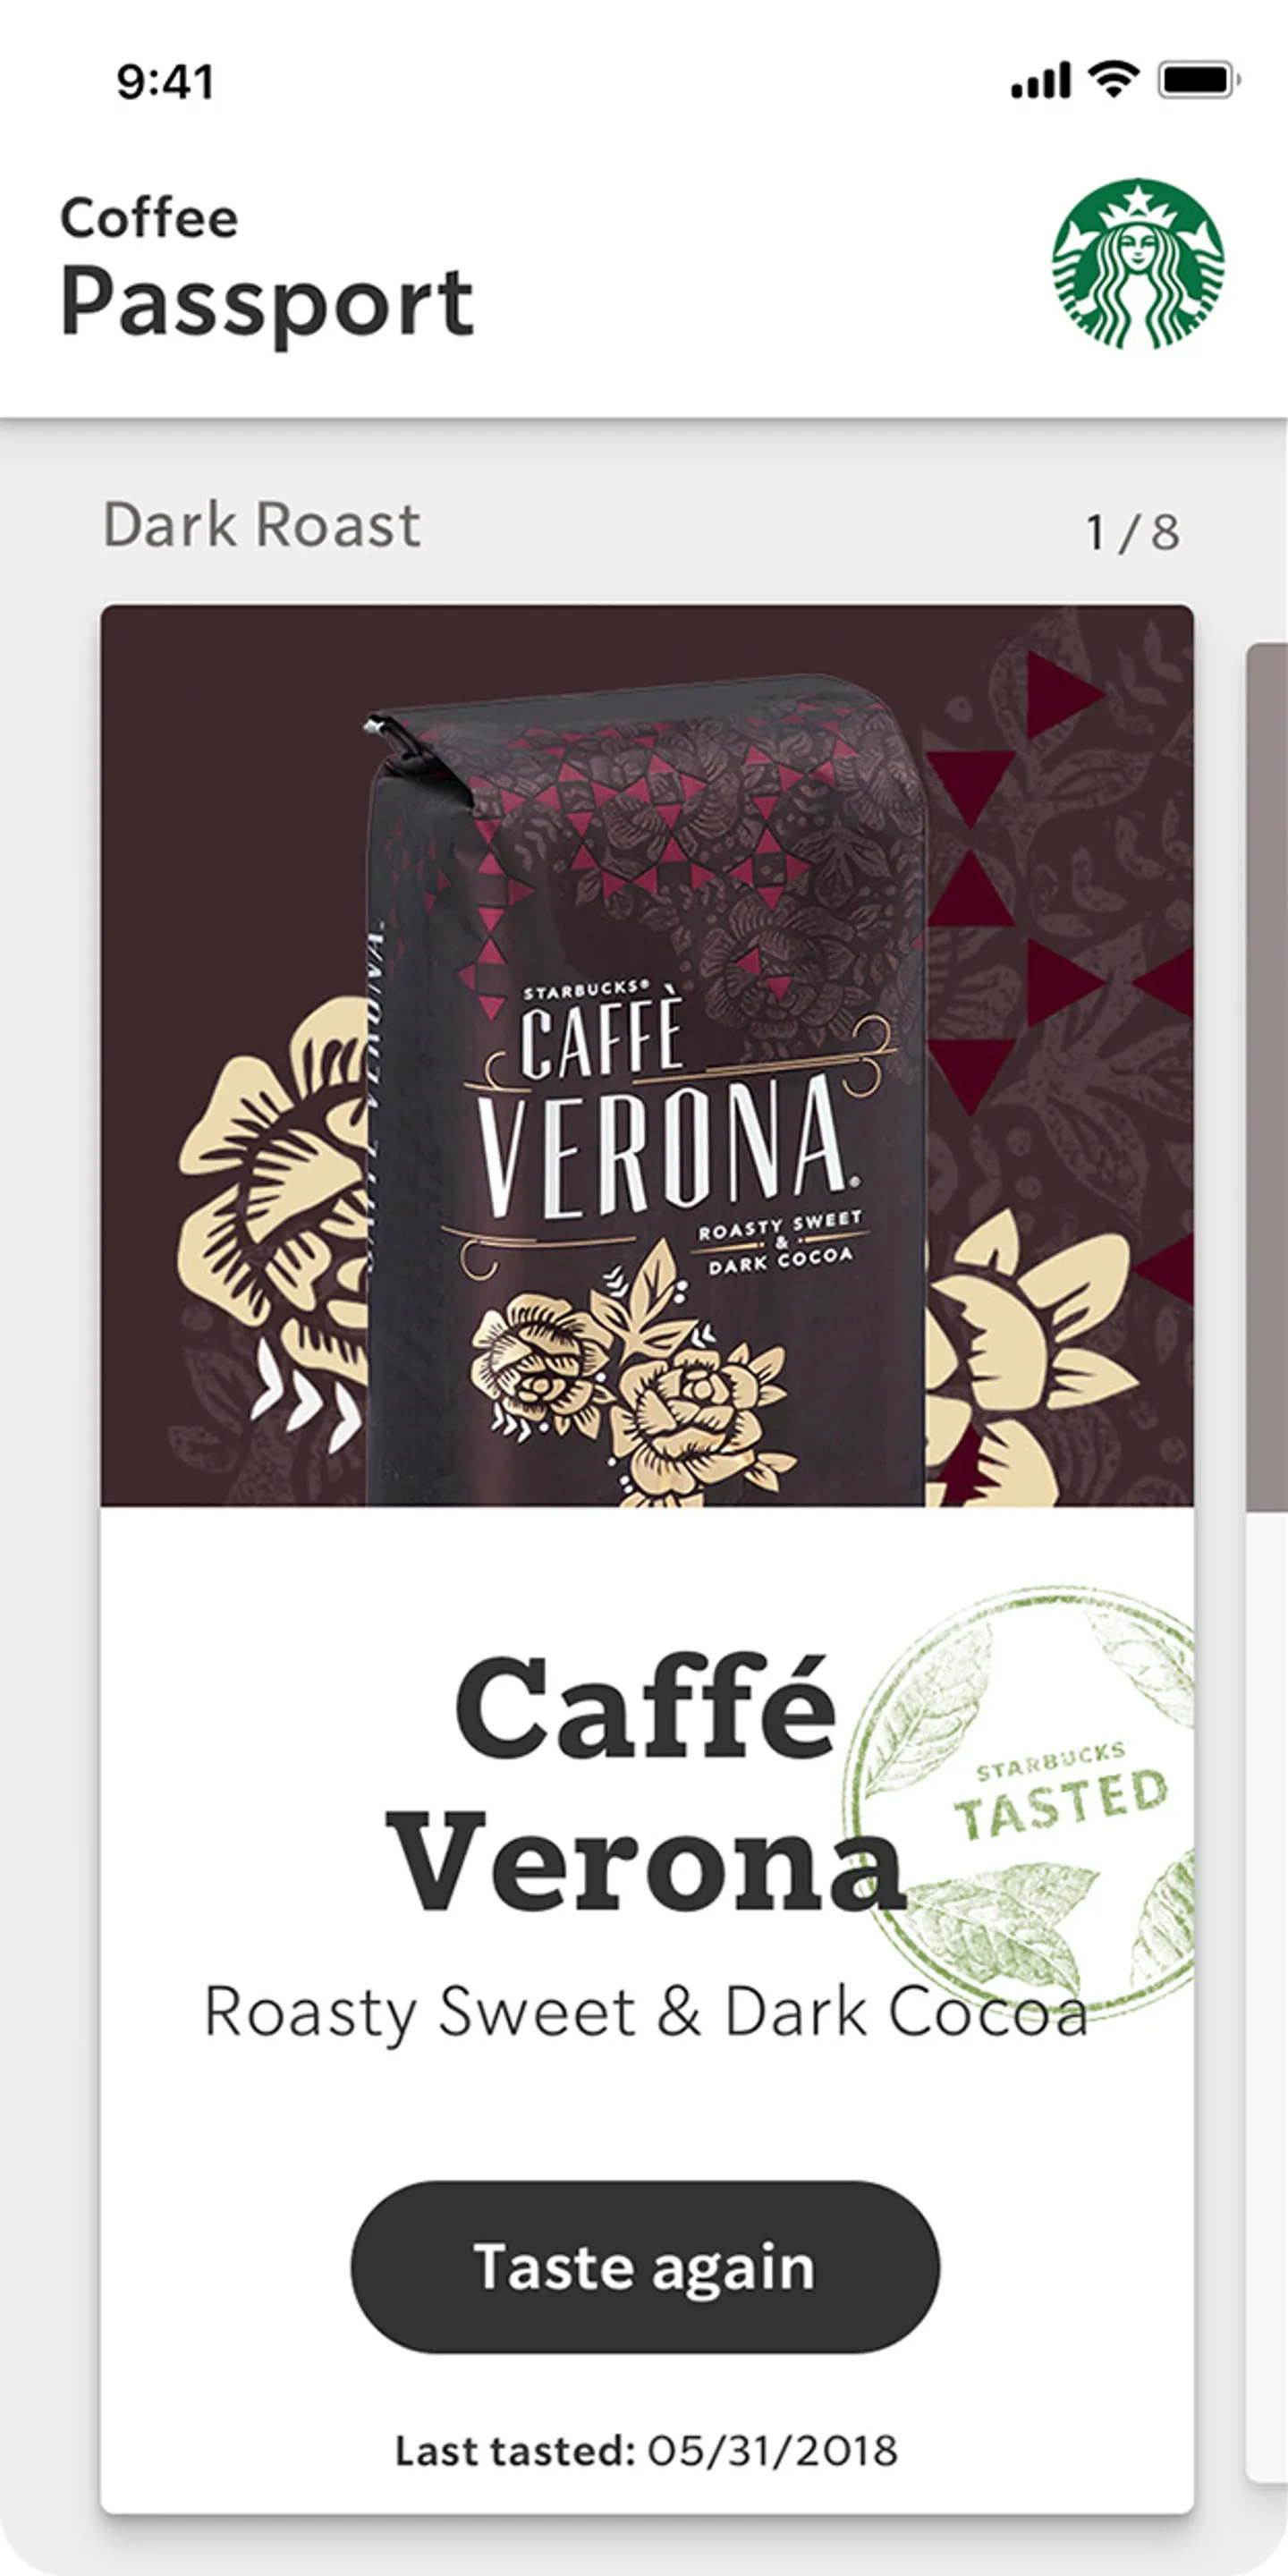 Mobile screen showing coffee packaging